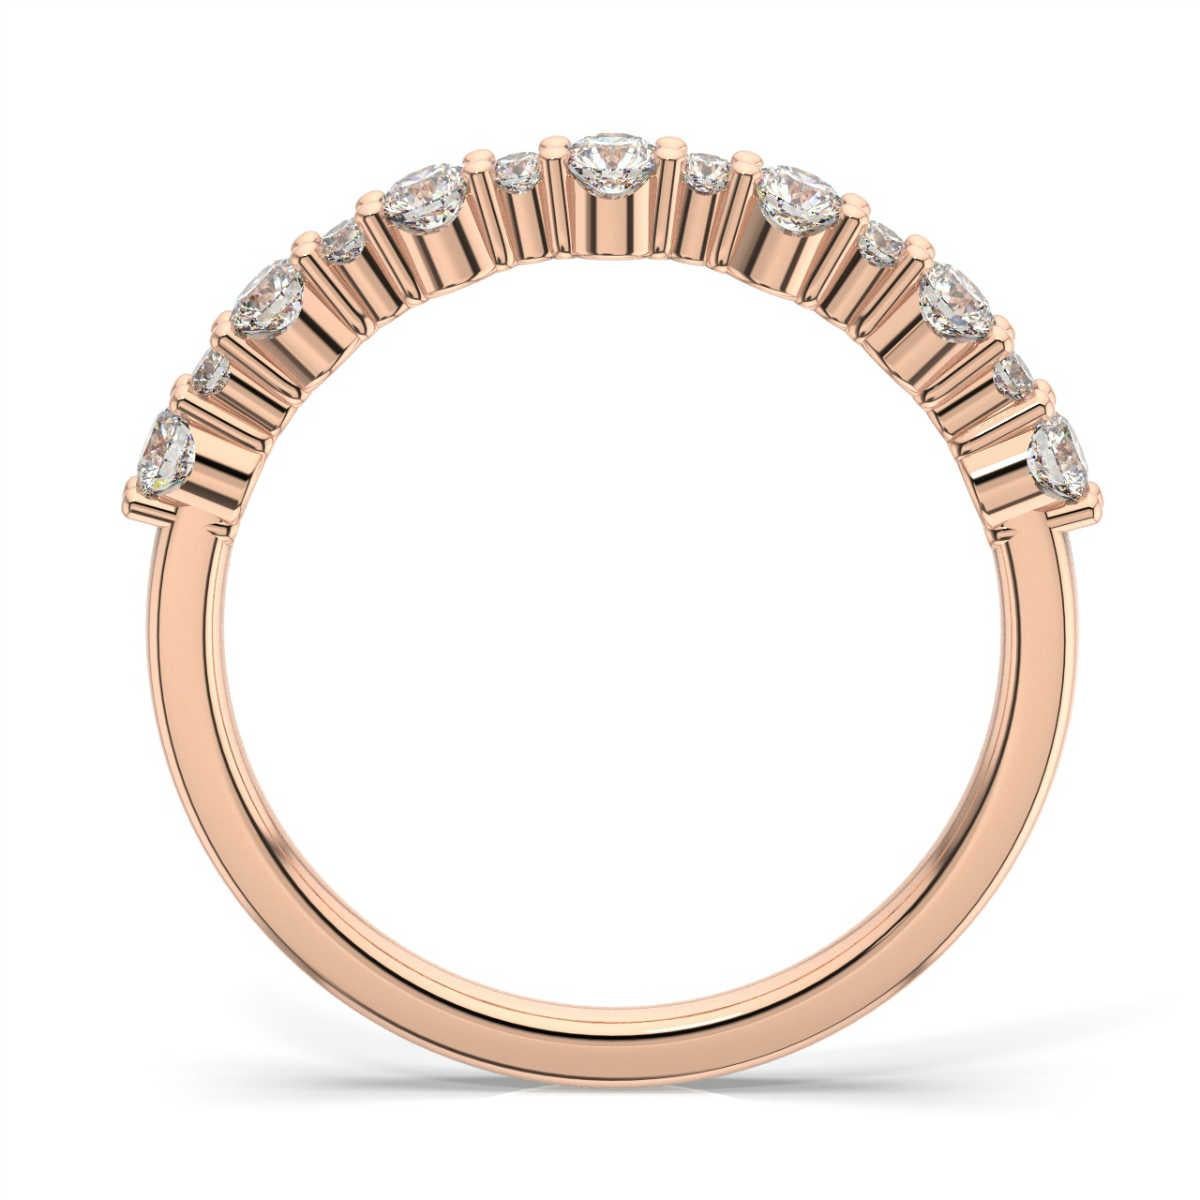 This Petite band features 13 alternating round brilliant diamonds. Experience the difference!

Product details: 

Center Gemstone Color: WHITE
Side Gemstone Type: NATURAL DIAMOND
Side Gemstone Shape: ROUND
Metal: 18K Rose Gold
Metal Weight: